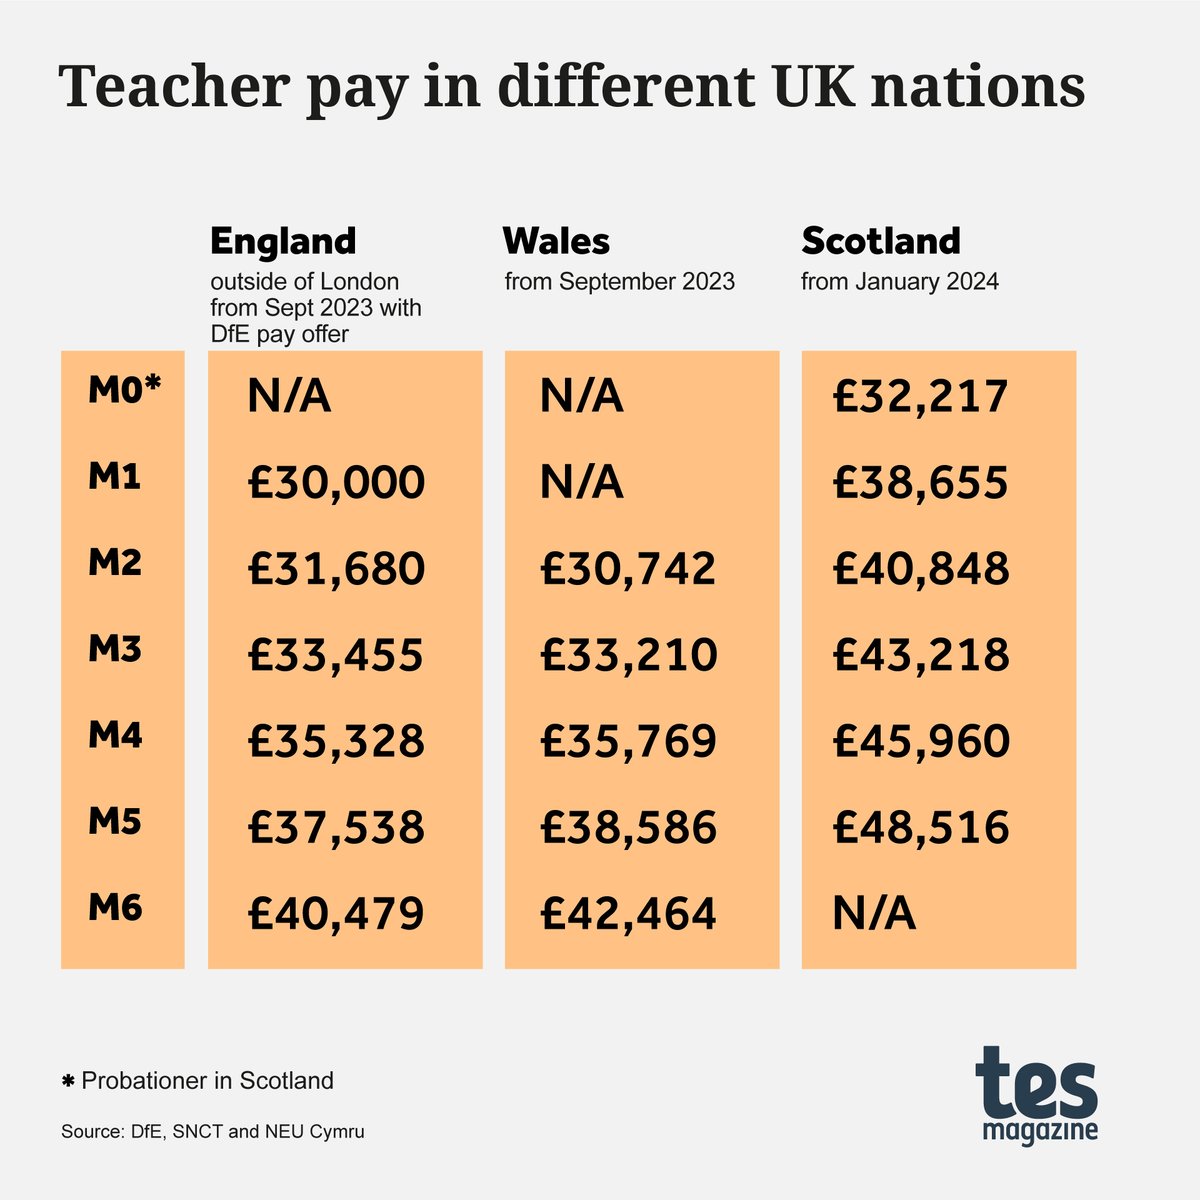 Heads in Northumberland, Cumberland and Cheshire tell @CallumCMason of fears a growing pay gap between England, Scotland and Wales will worsen teacher recruitment and retention in English schools that fall within commuting distance of the other two nations tes.com/magazine/news/…